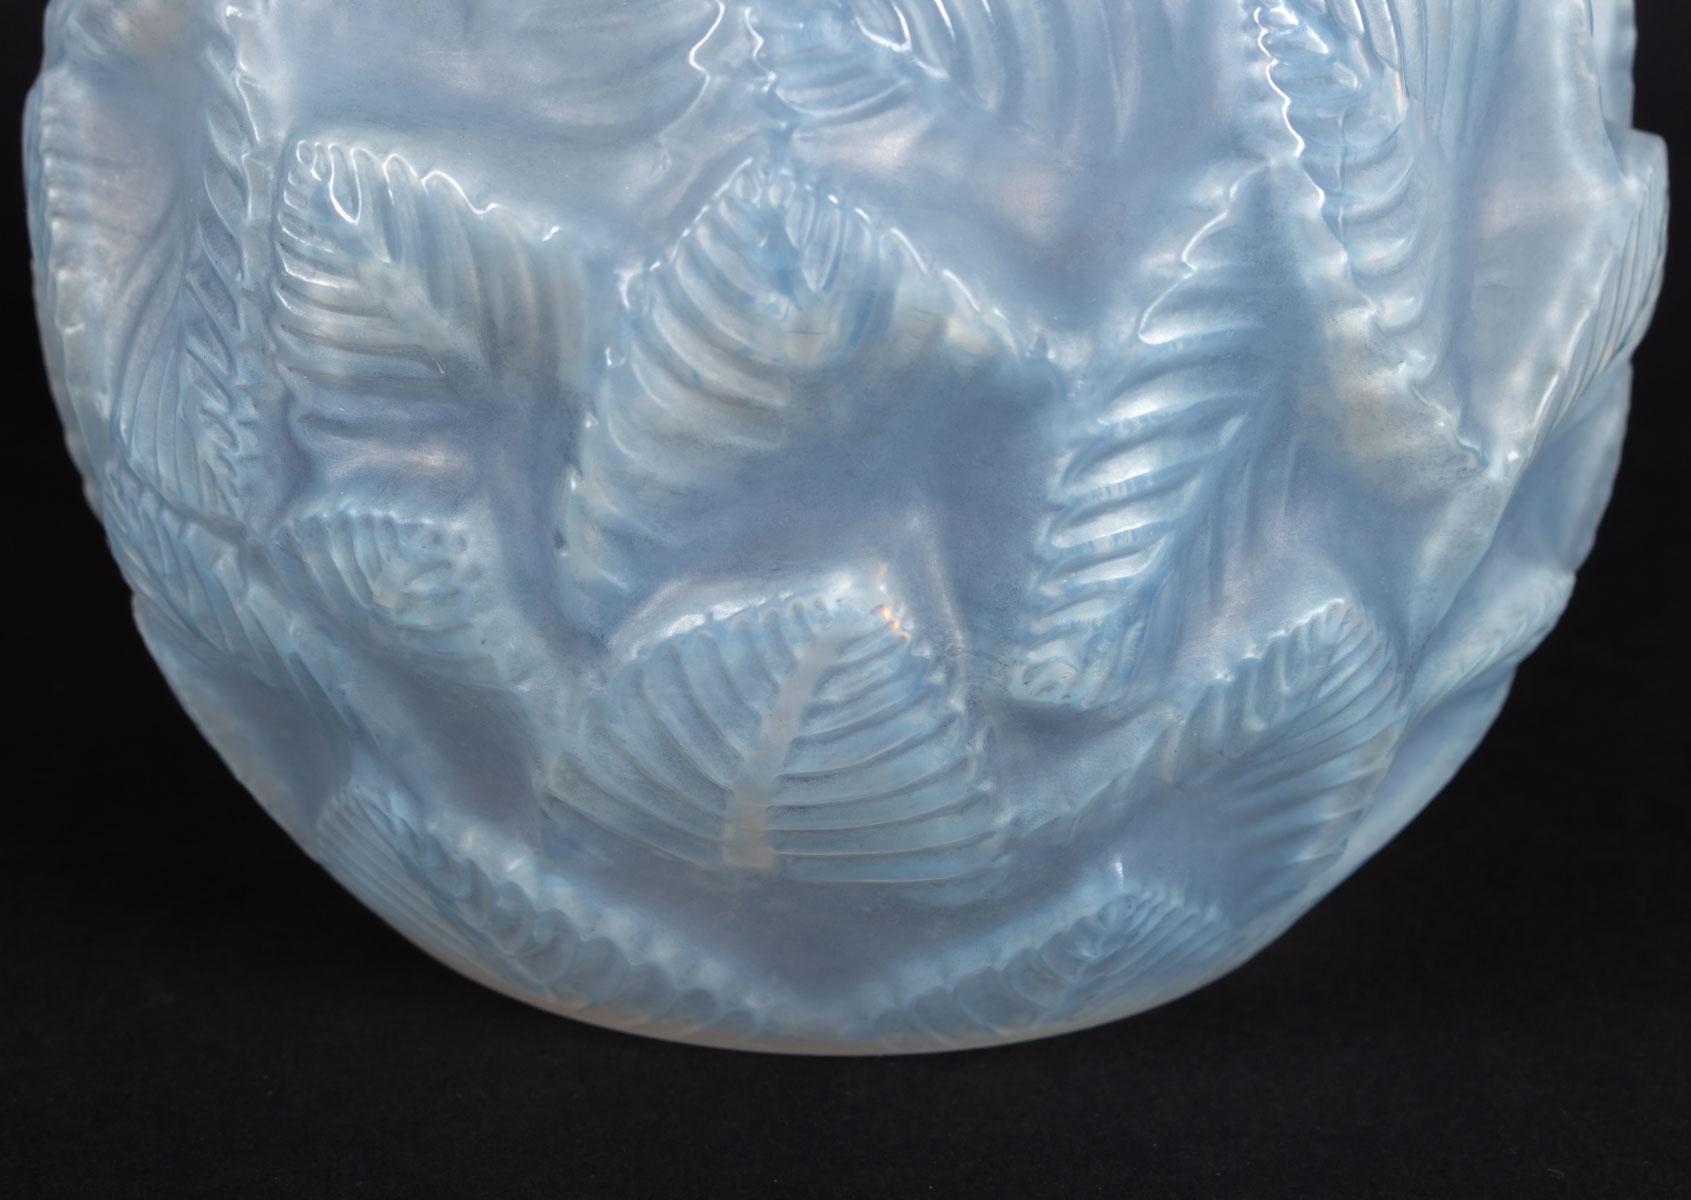 Molded 1926 René Lalique Ormeaux Vase in Cased Opalescent Glass with Blue Patina